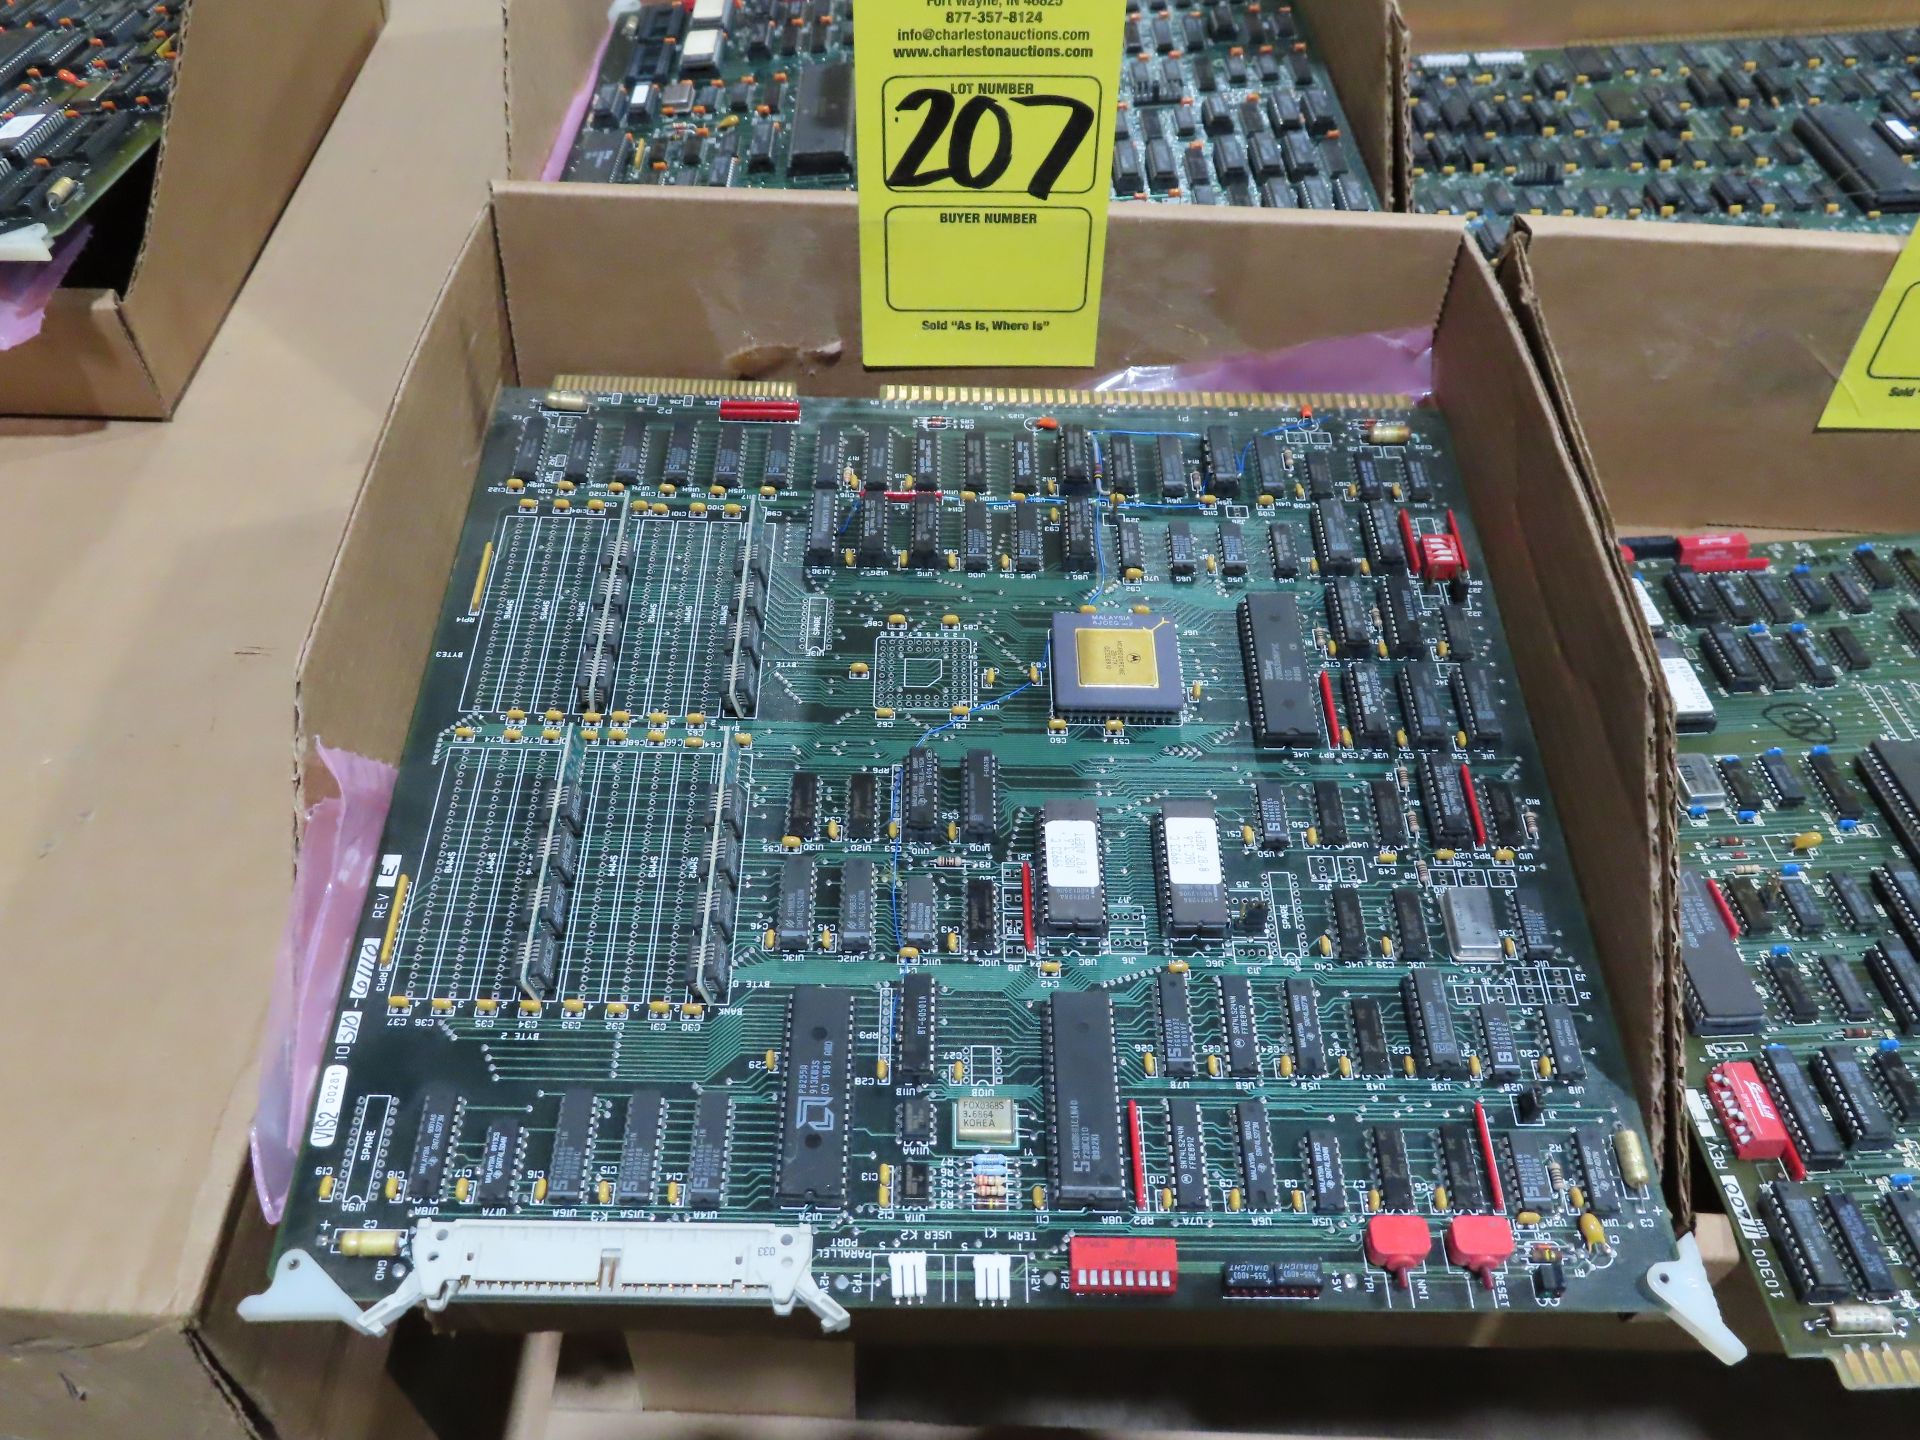 Adept 10310-61110 rev E vision board, as always, with Brolyn LLC auctions, all lots can be picked up